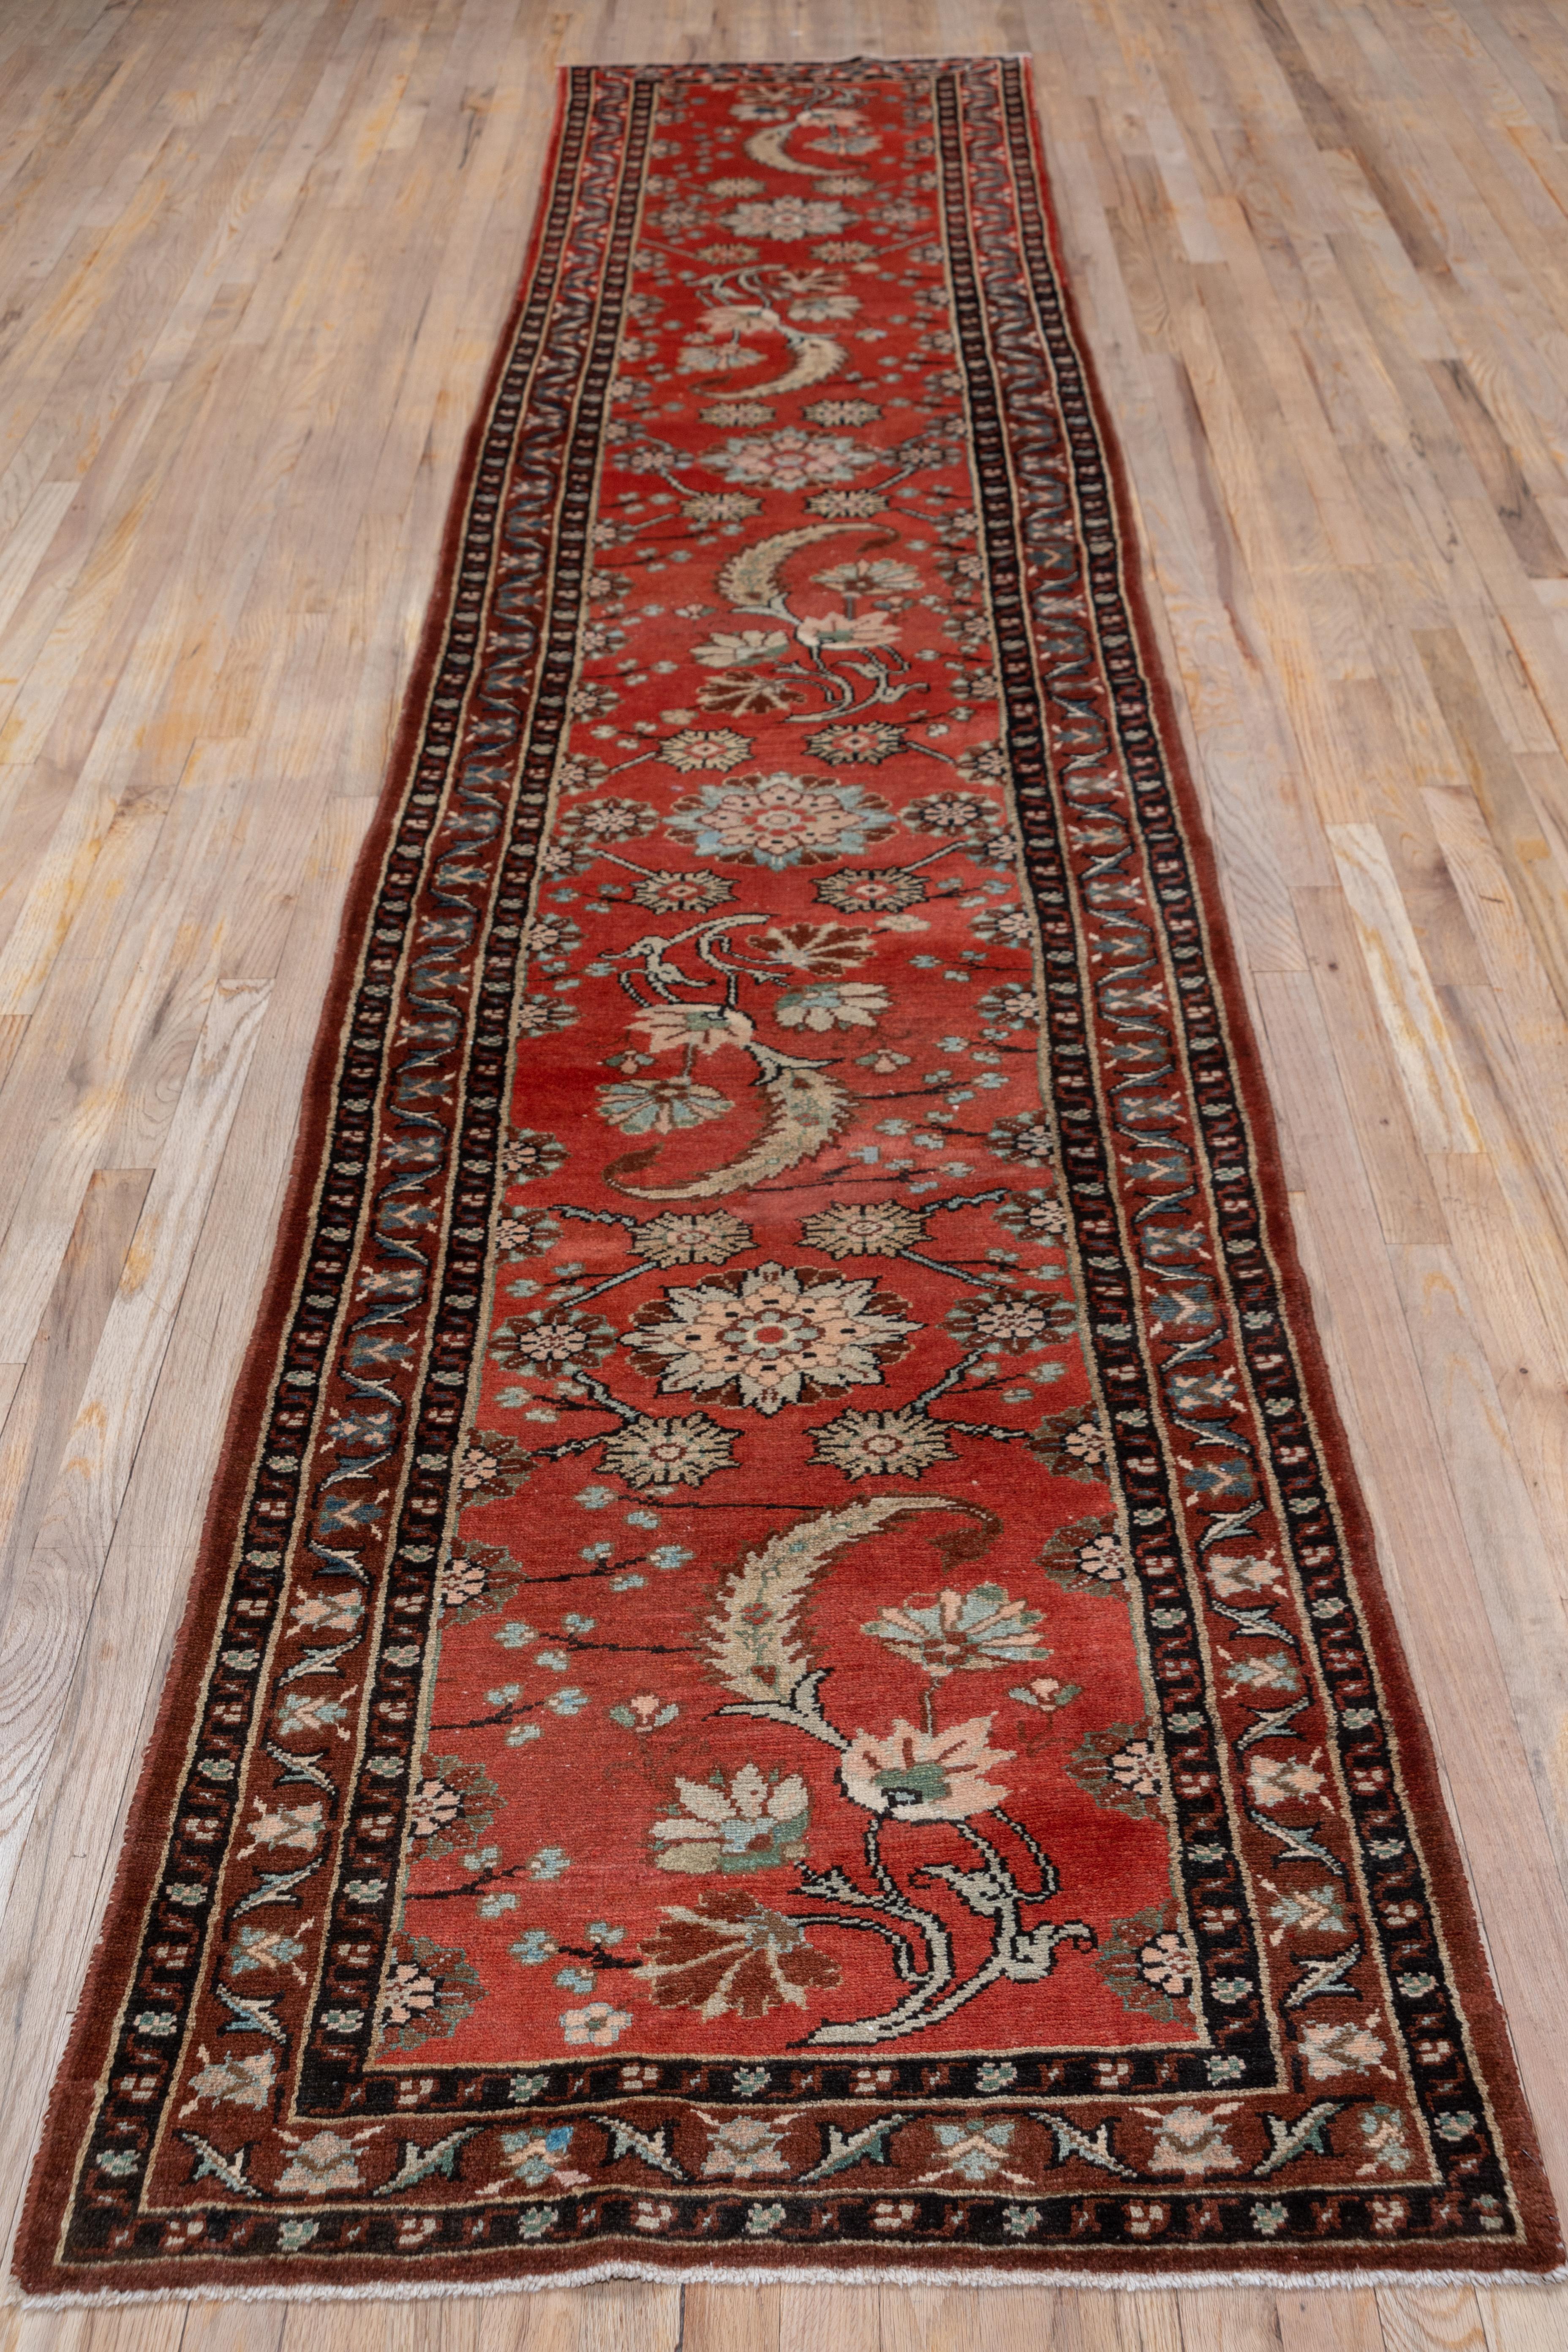 This Hamadan region village red runner displays eight petal large rosettes and dynamic leaves with supporting lesser rosettes and palmettes in shades pf pale green, navy, cream and blue-black. The condition is excellent, with full pile and a